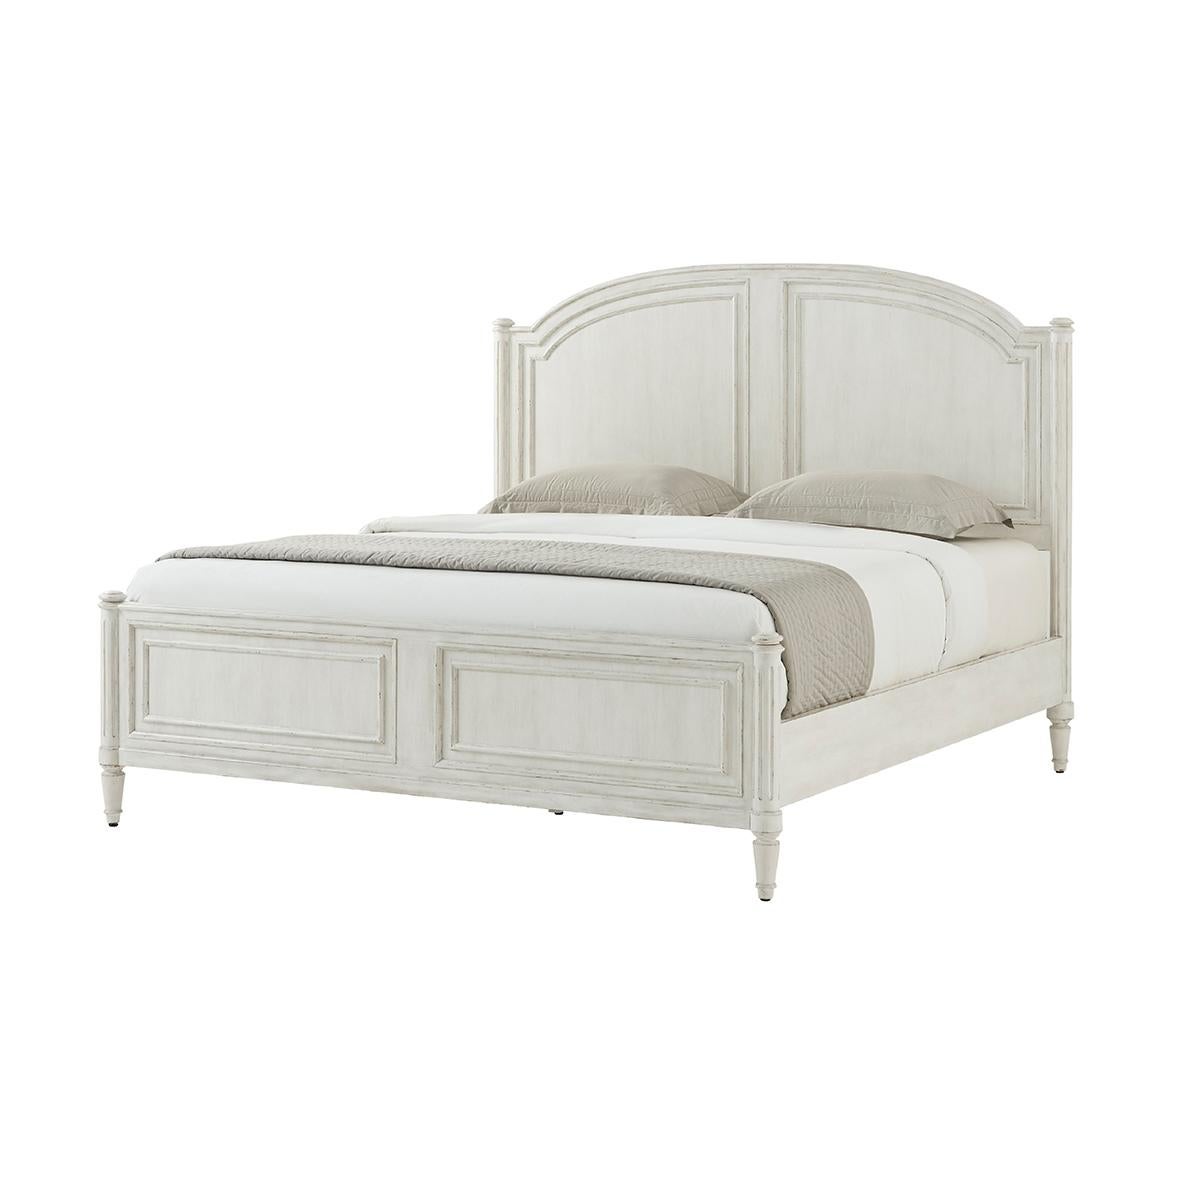 A white washed painted four post king size bed with carved arch panel headboard and paneled footboard with turned posts having ball finials and raised on fluted styles and turned and tapered feet.

Dimensions: 77.5